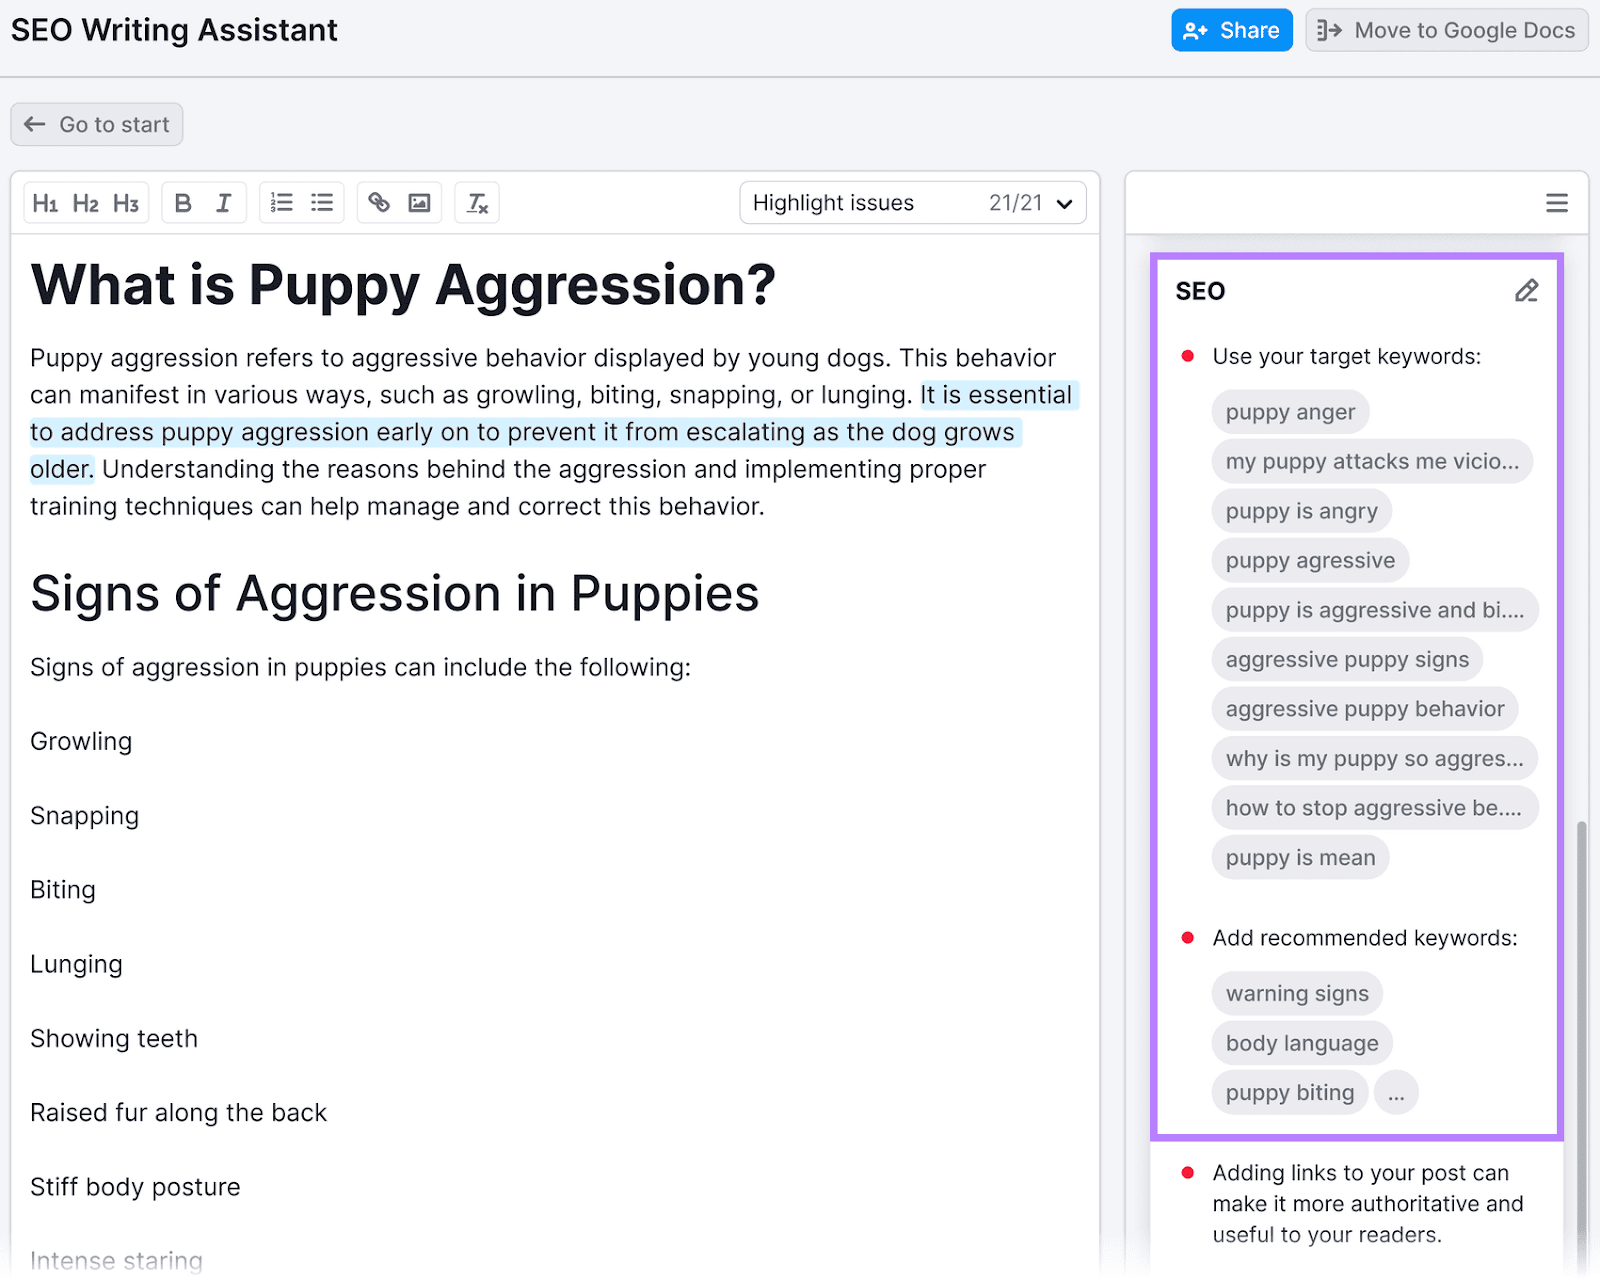 SEO Writing Assistant showing an article draft on puppy aggression and related SEO keyword suggestions.